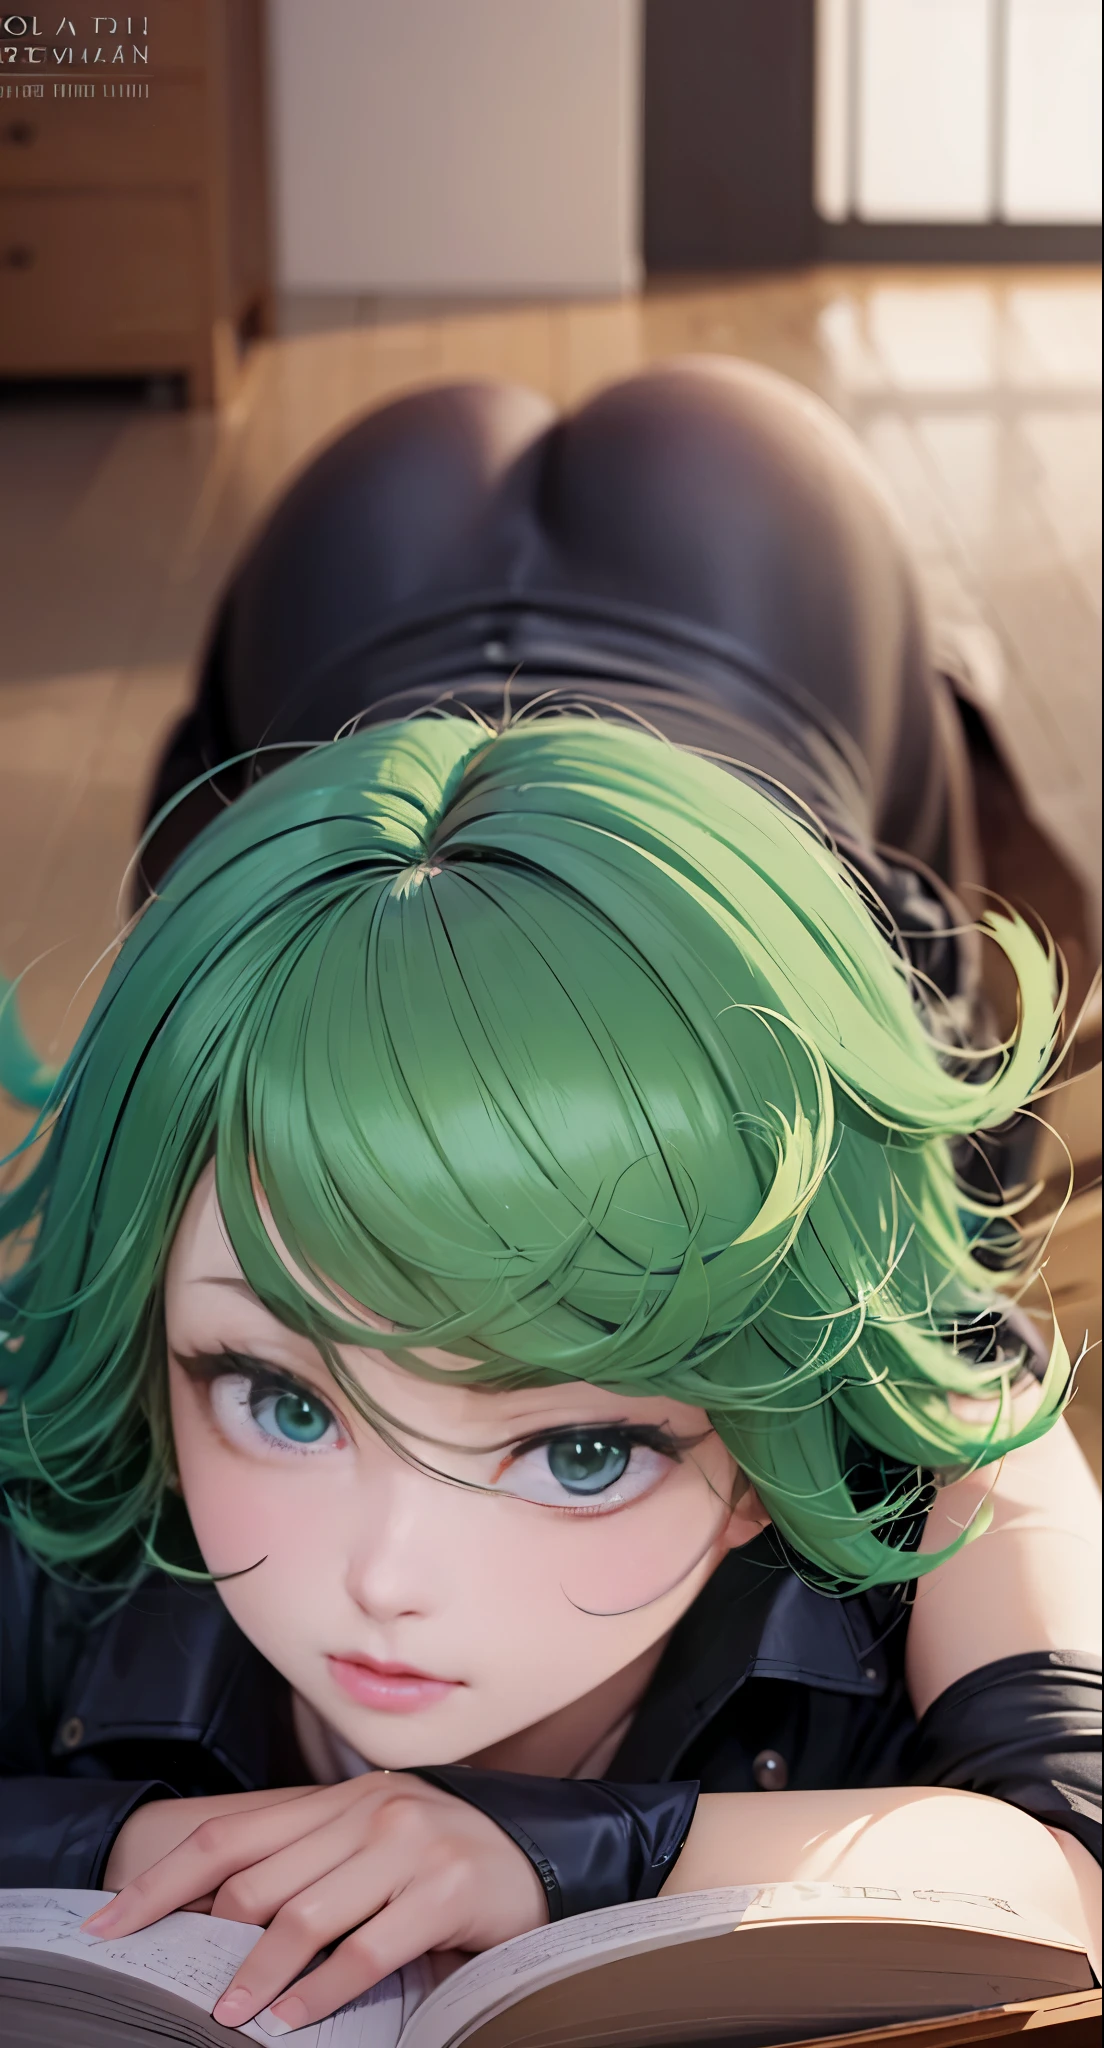 anime girl with green hair and black dress laying on floor next to open book, an anime drawing by Shitao, pixiv, fantasy art, top rated on pixiv, at pixiv, tatsumaki from one punch man, beautiful anime girl,jack-O', bending over, seductive anime girl, the anime girl is crouching, tatsumaki